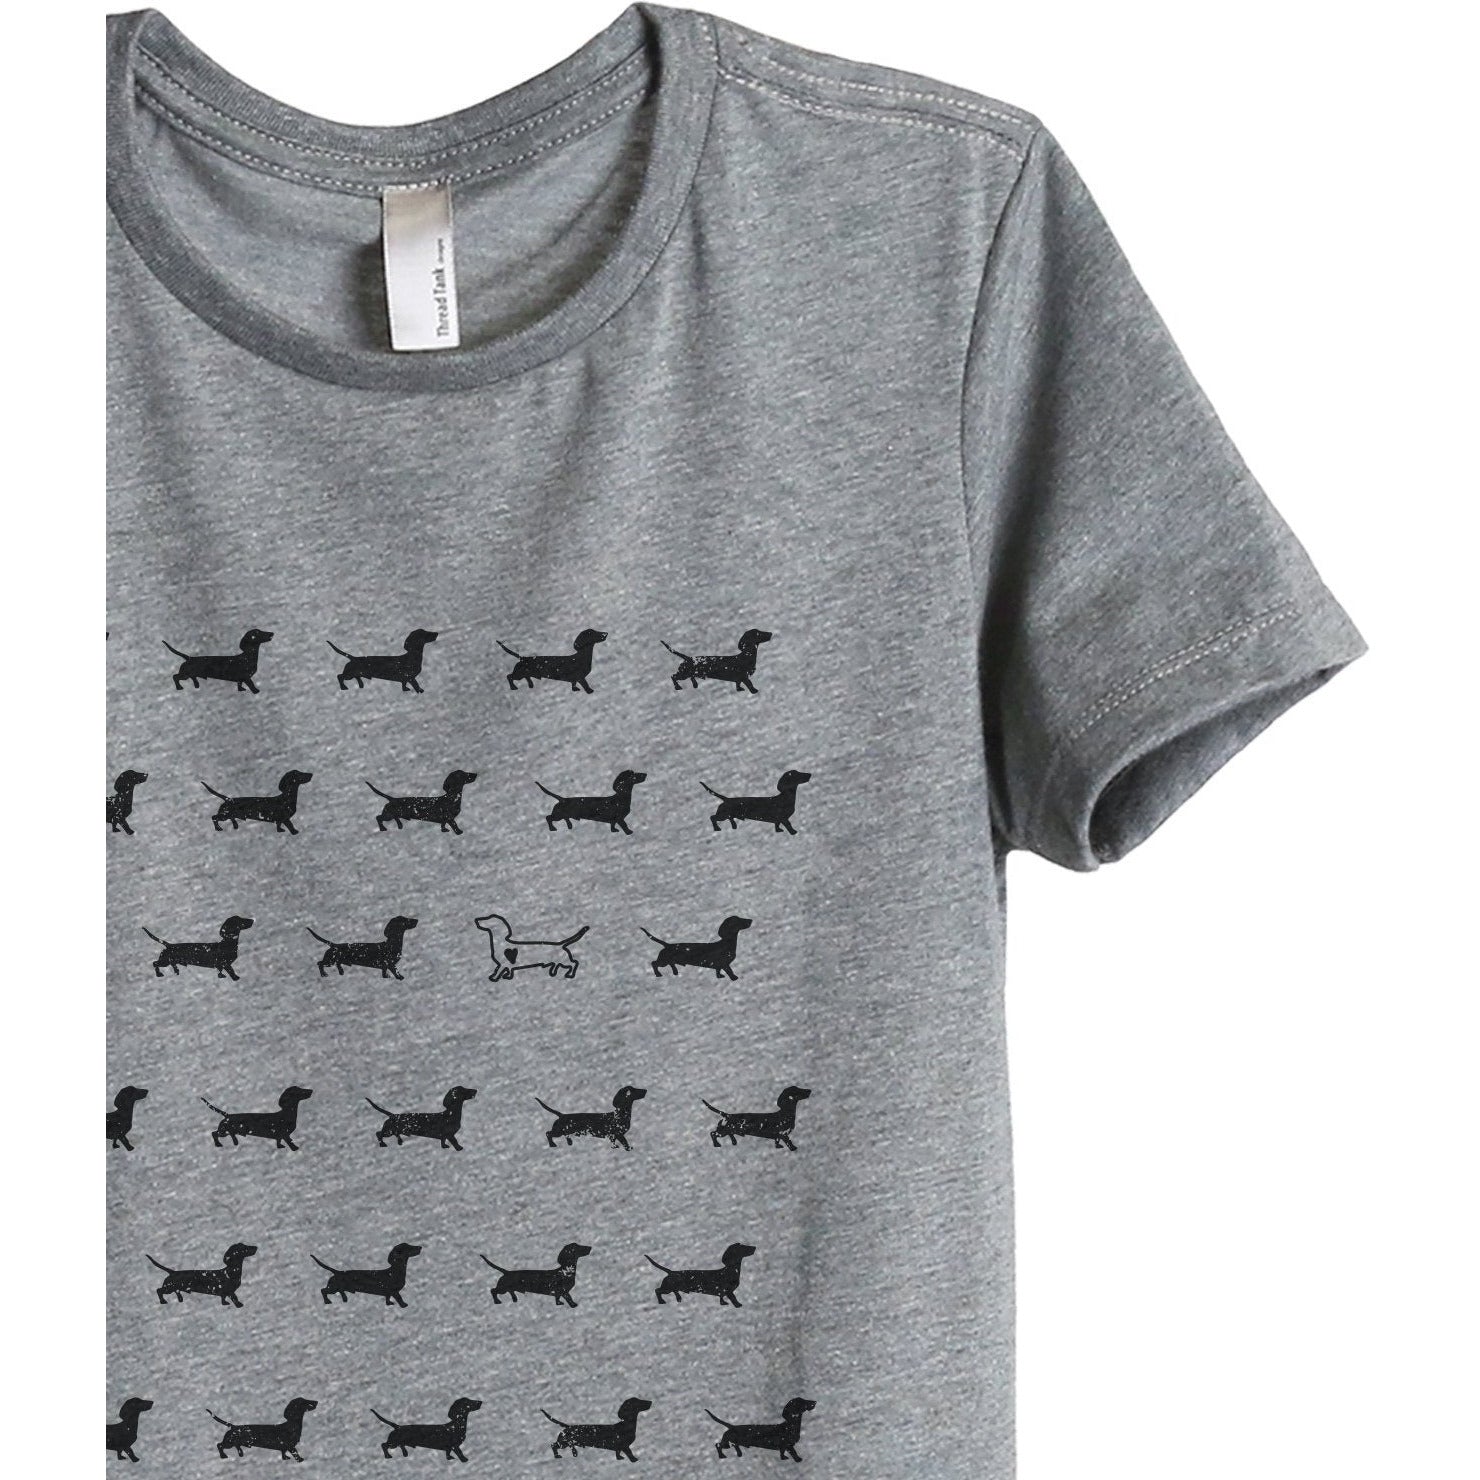 Dachshund Stand Out Women's Relaxed Crewneck T-Shirt Top Tee Heather Grey Zoom Details
